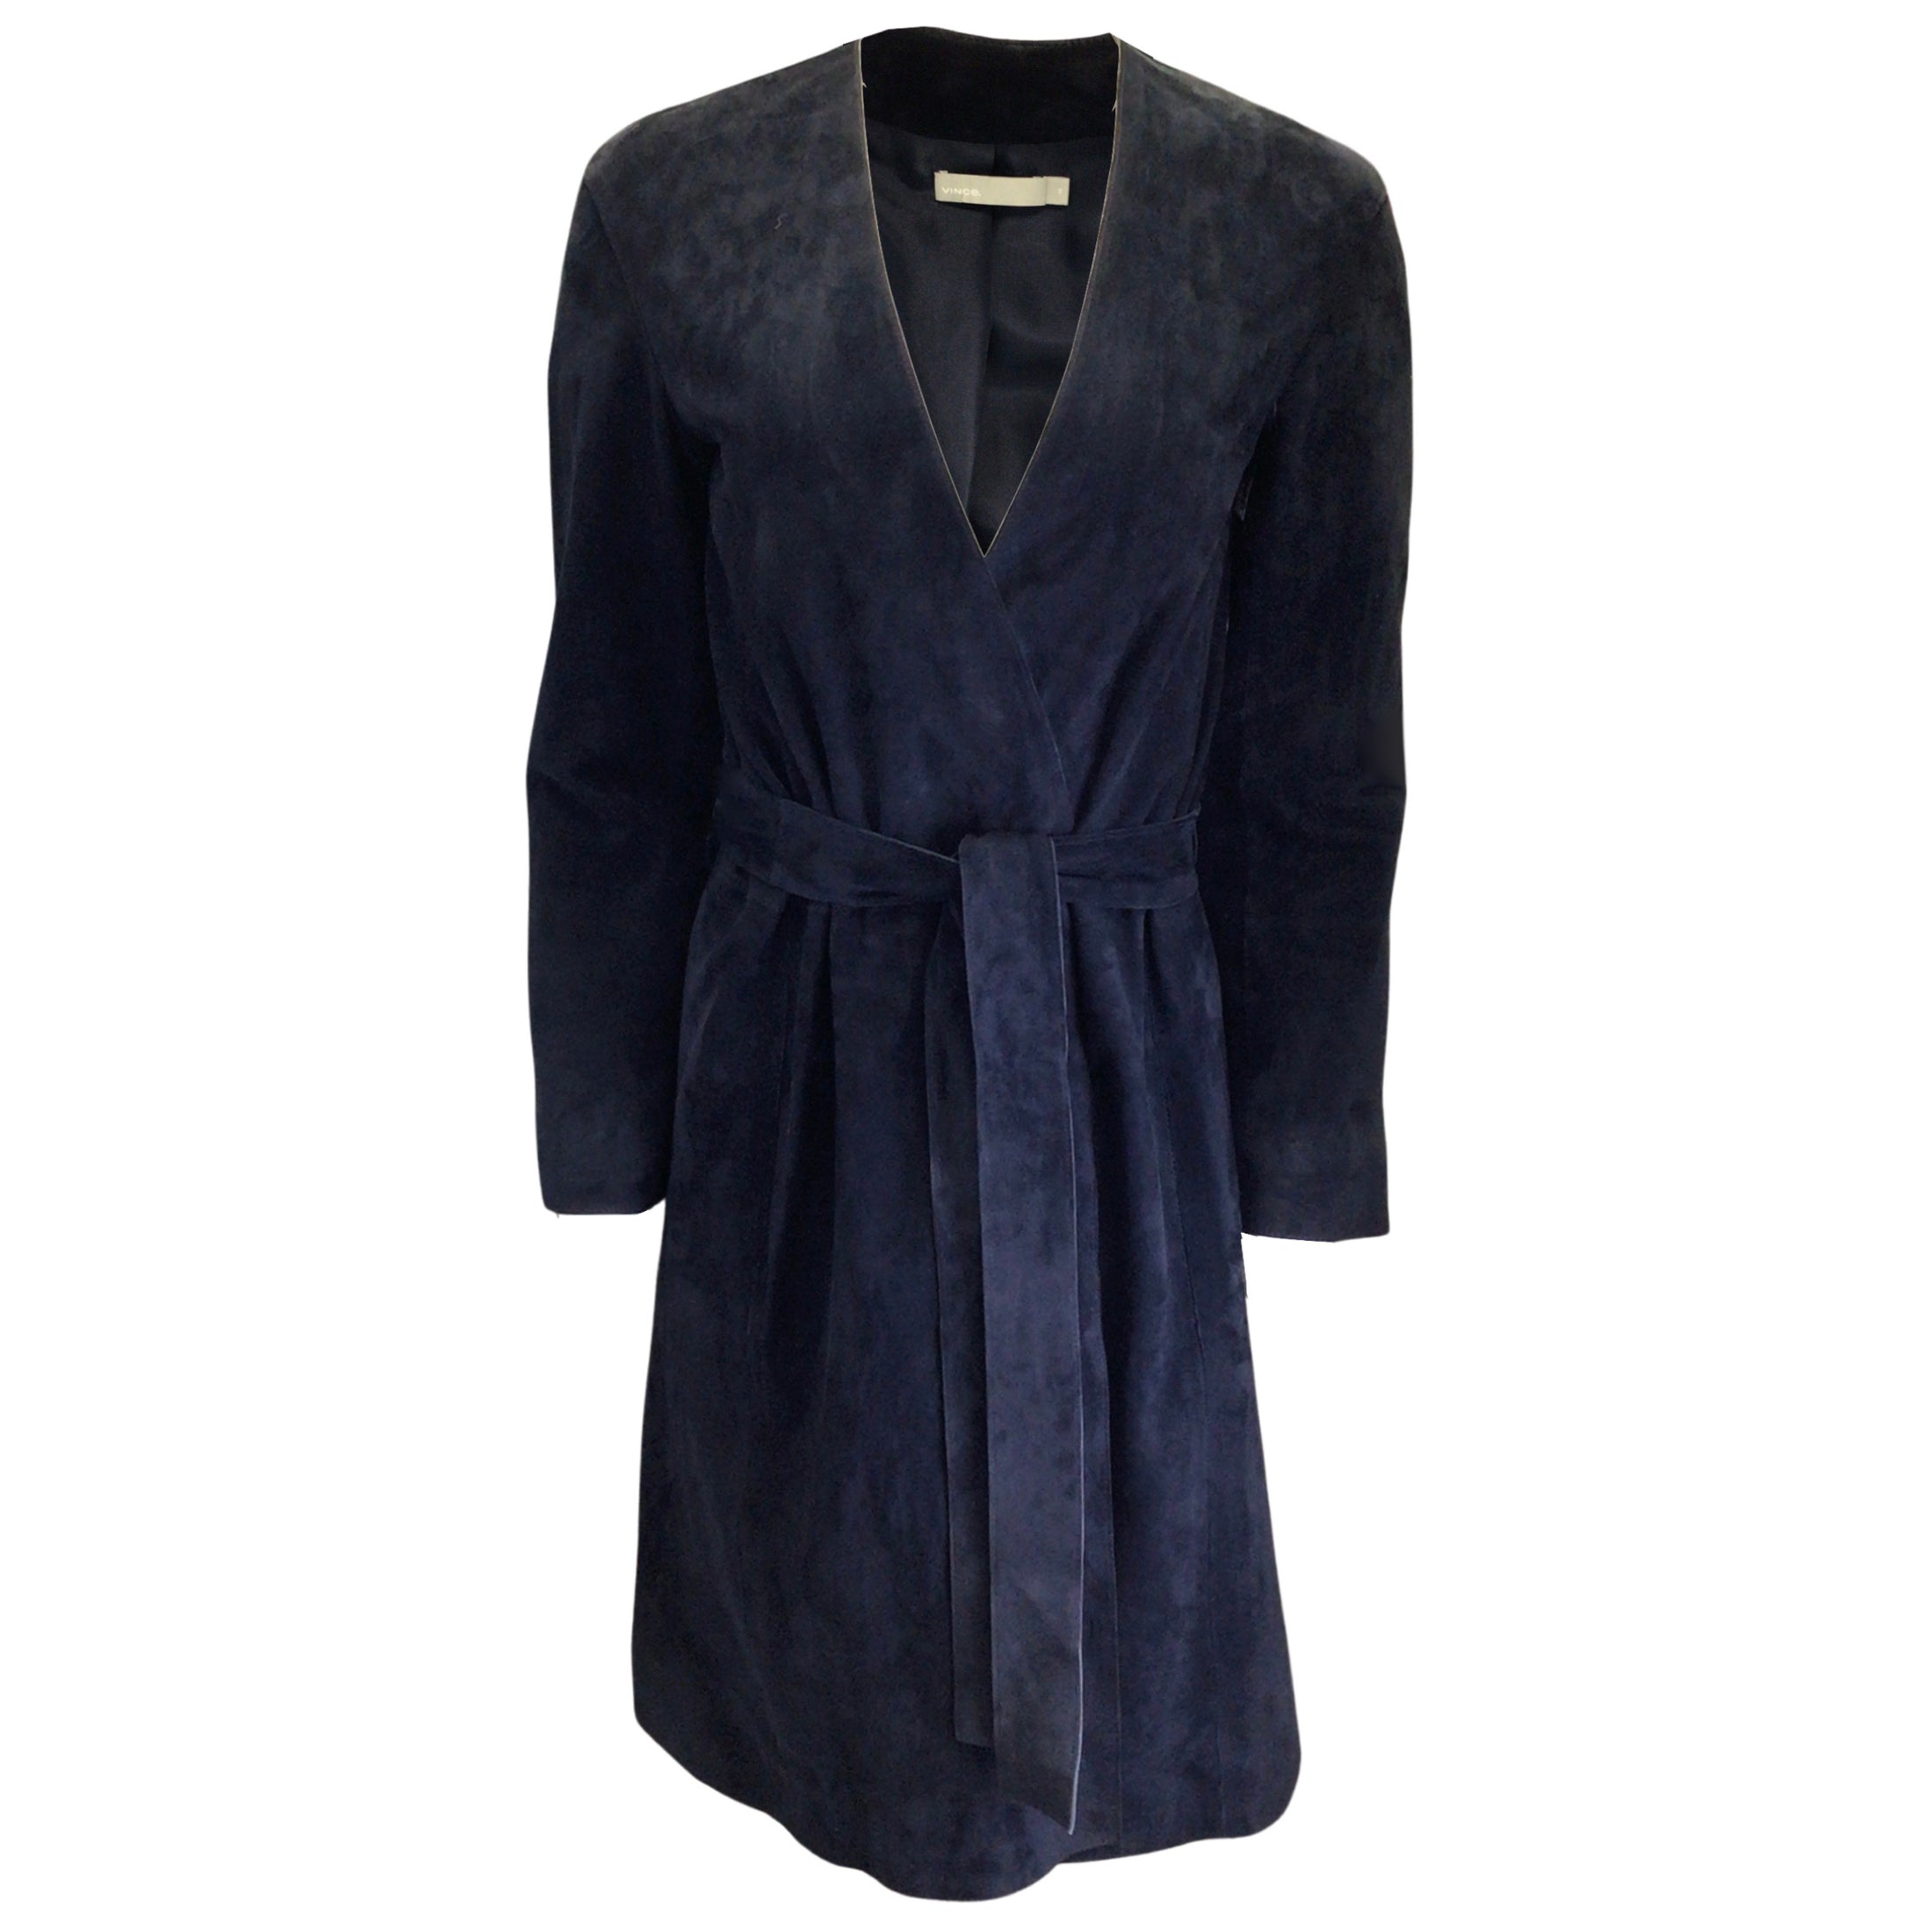 Vince Navy Blue Suede Leather Robe Coat